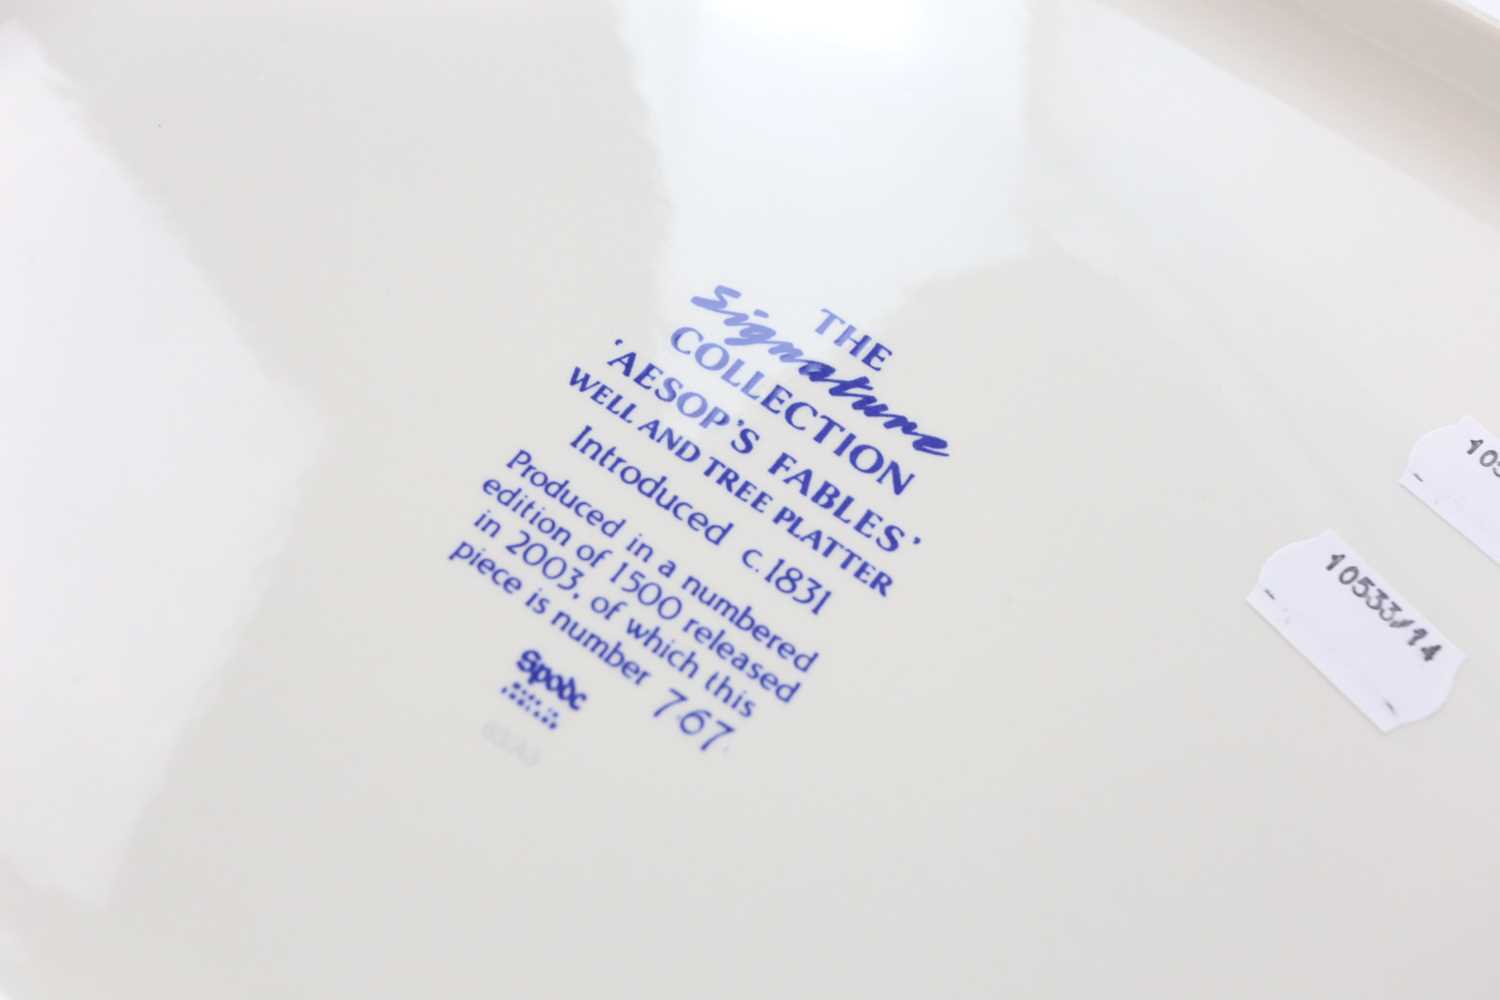 SPODE; a Signature Collection 'Aesop's Fables' meat plate, 52 x 39cm. - Image 5 of 5